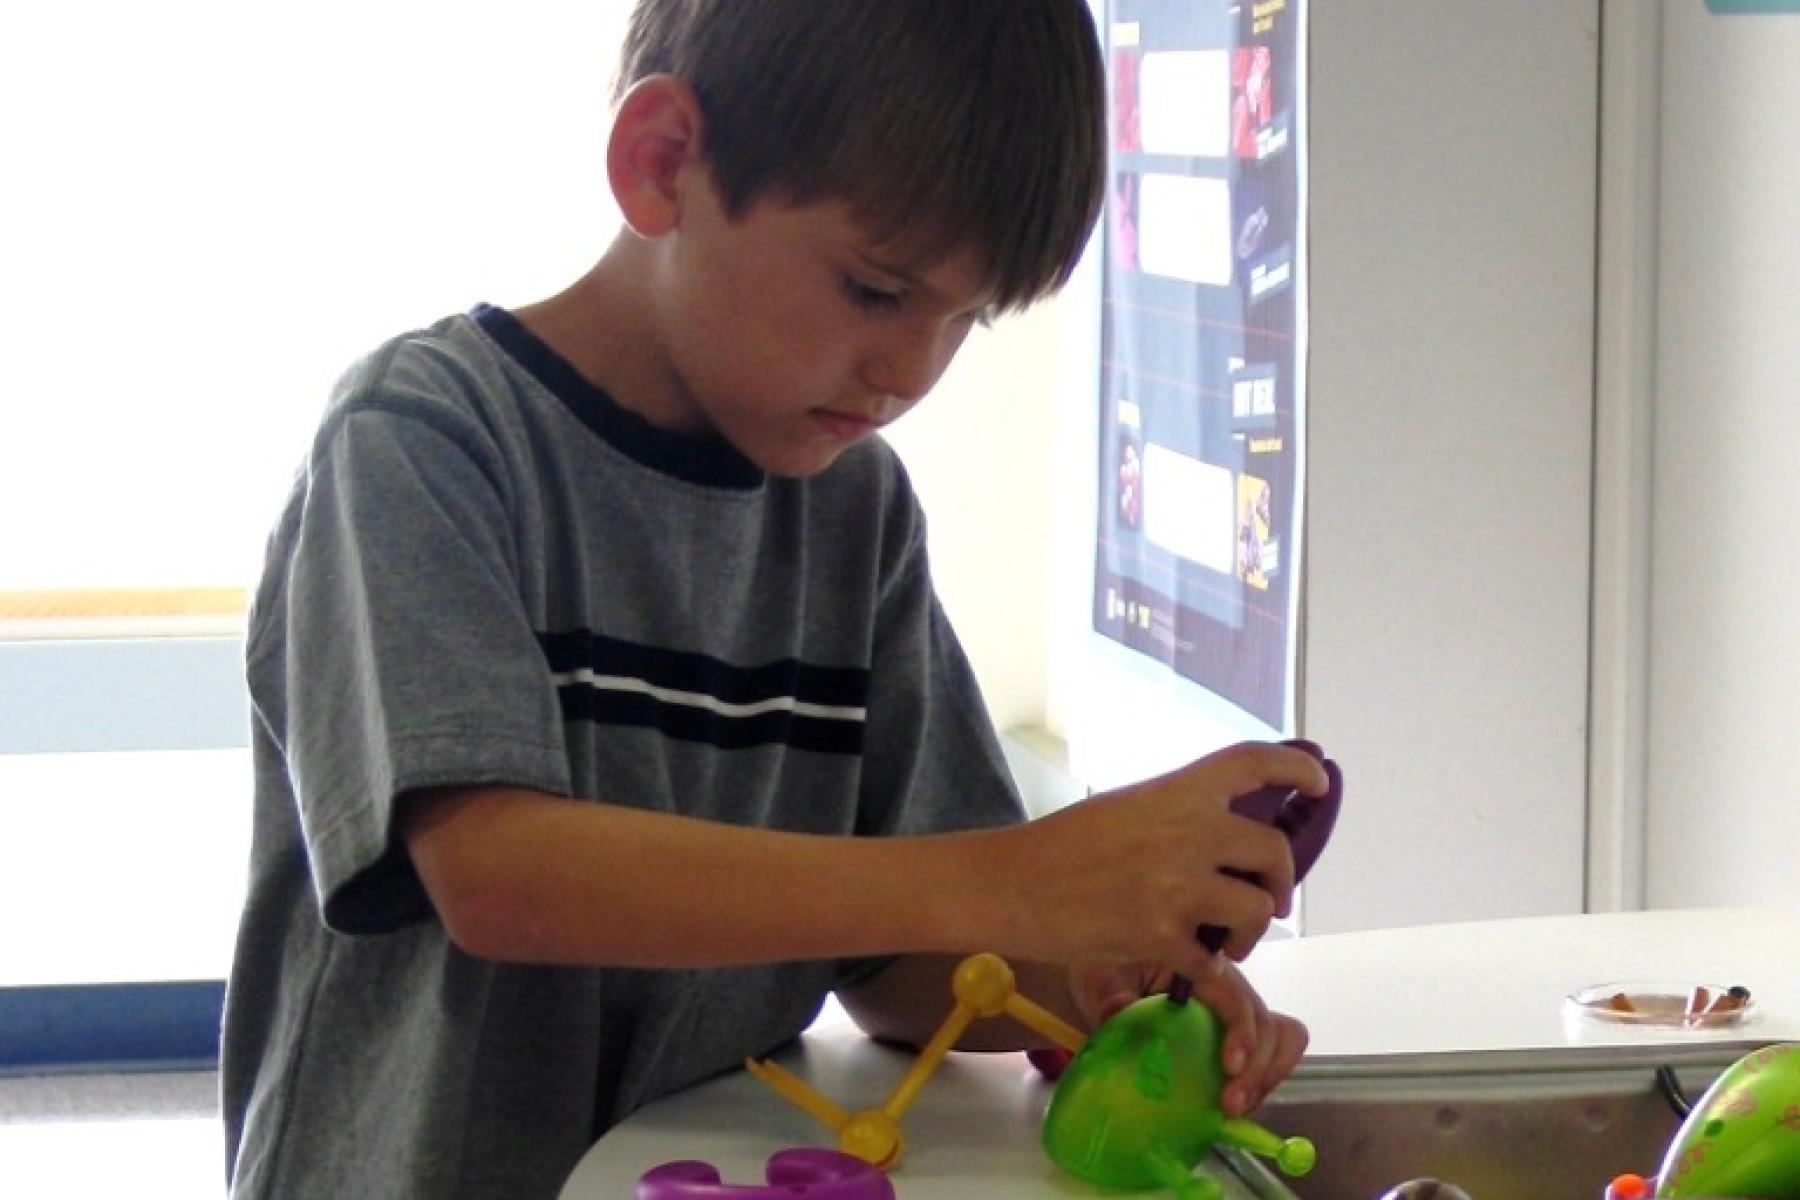 A young learner manipulating various colorful plastic objects in the Fact or Fiction? exhibit